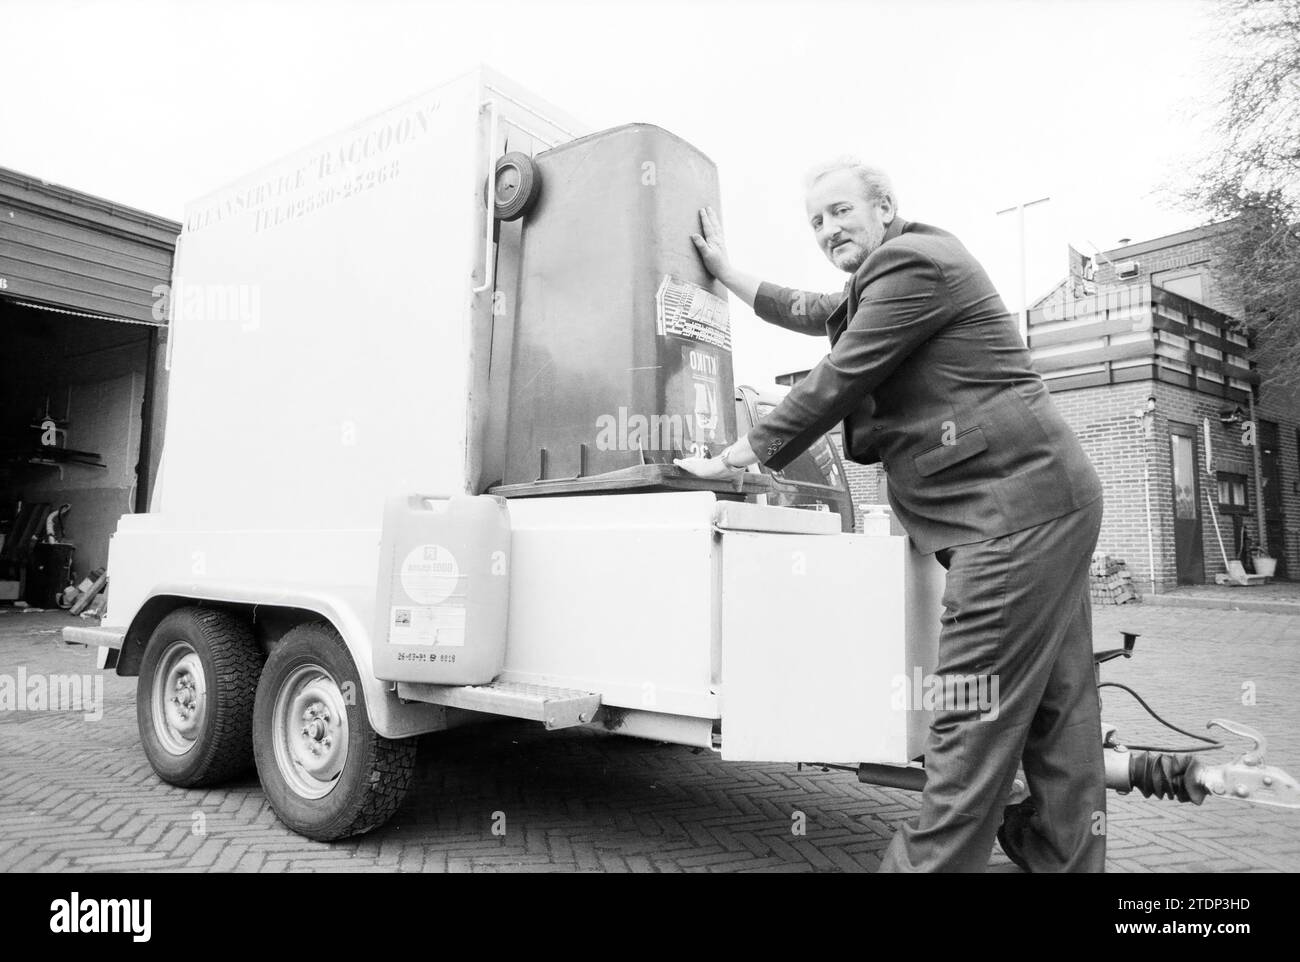 Mr. Jasper, Waste Container Cleaning, IJm., IJmuiden, The Netherlands, 05-05-1991, Whizgle News from the Past, Tailored for the Future. Explore historical narratives, Dutch The Netherlands agency image with a modern perspective, bridging the gap between yesterday's events and tomorrow's insights. A timeless journey shaping the stories that shape our future Stock Photo